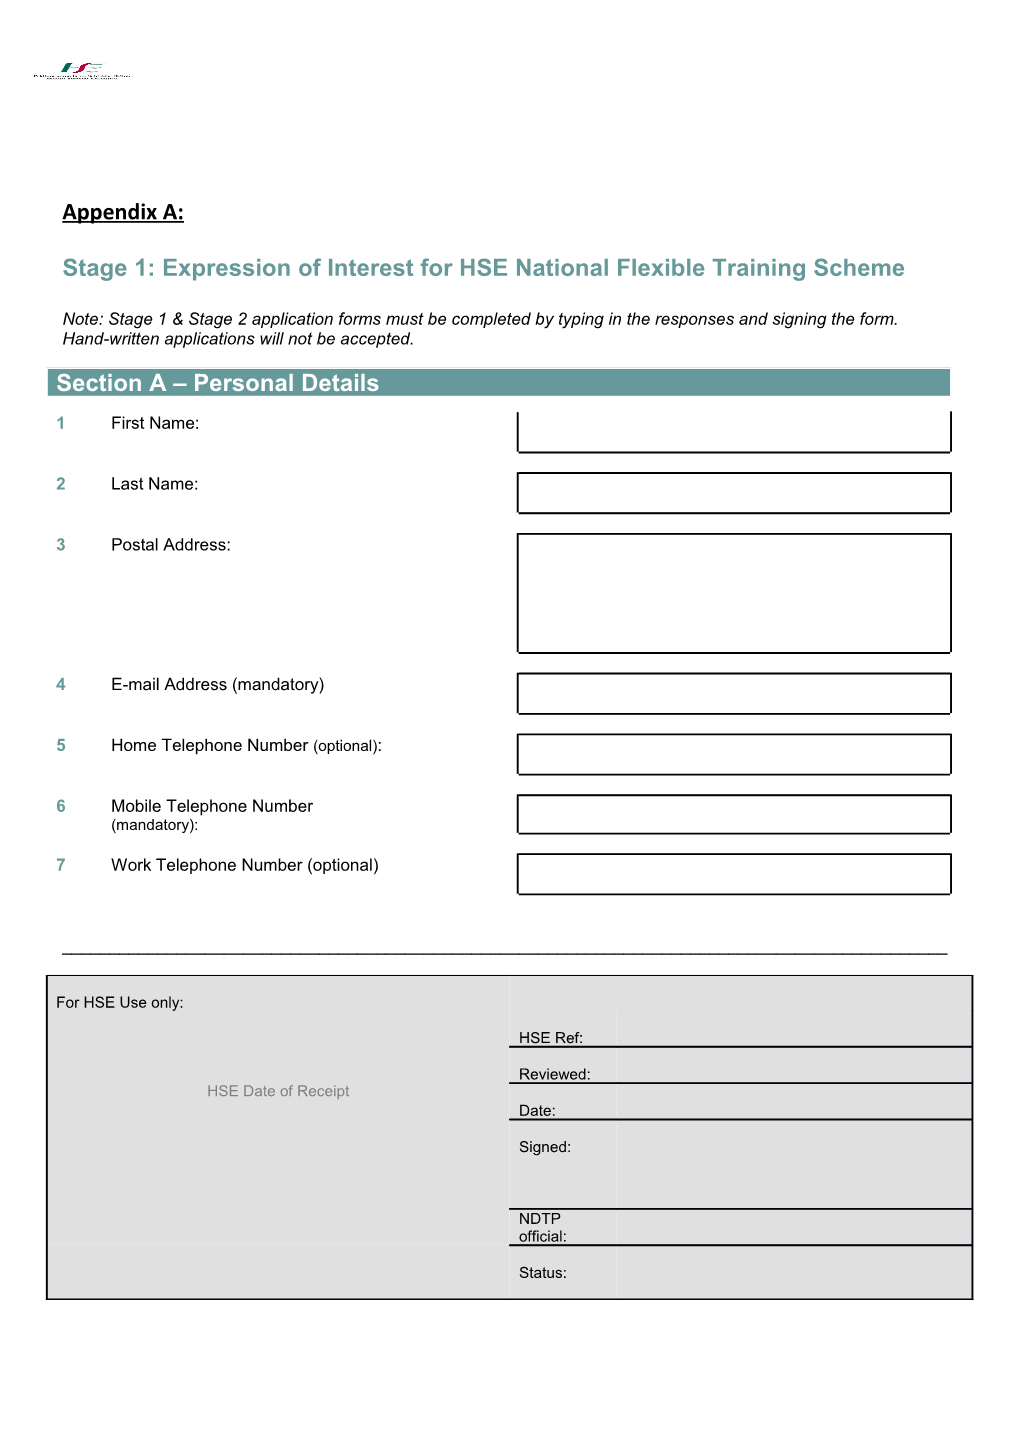 Stage 1: Expression of Interest for HSE National Flexible Training Scheme